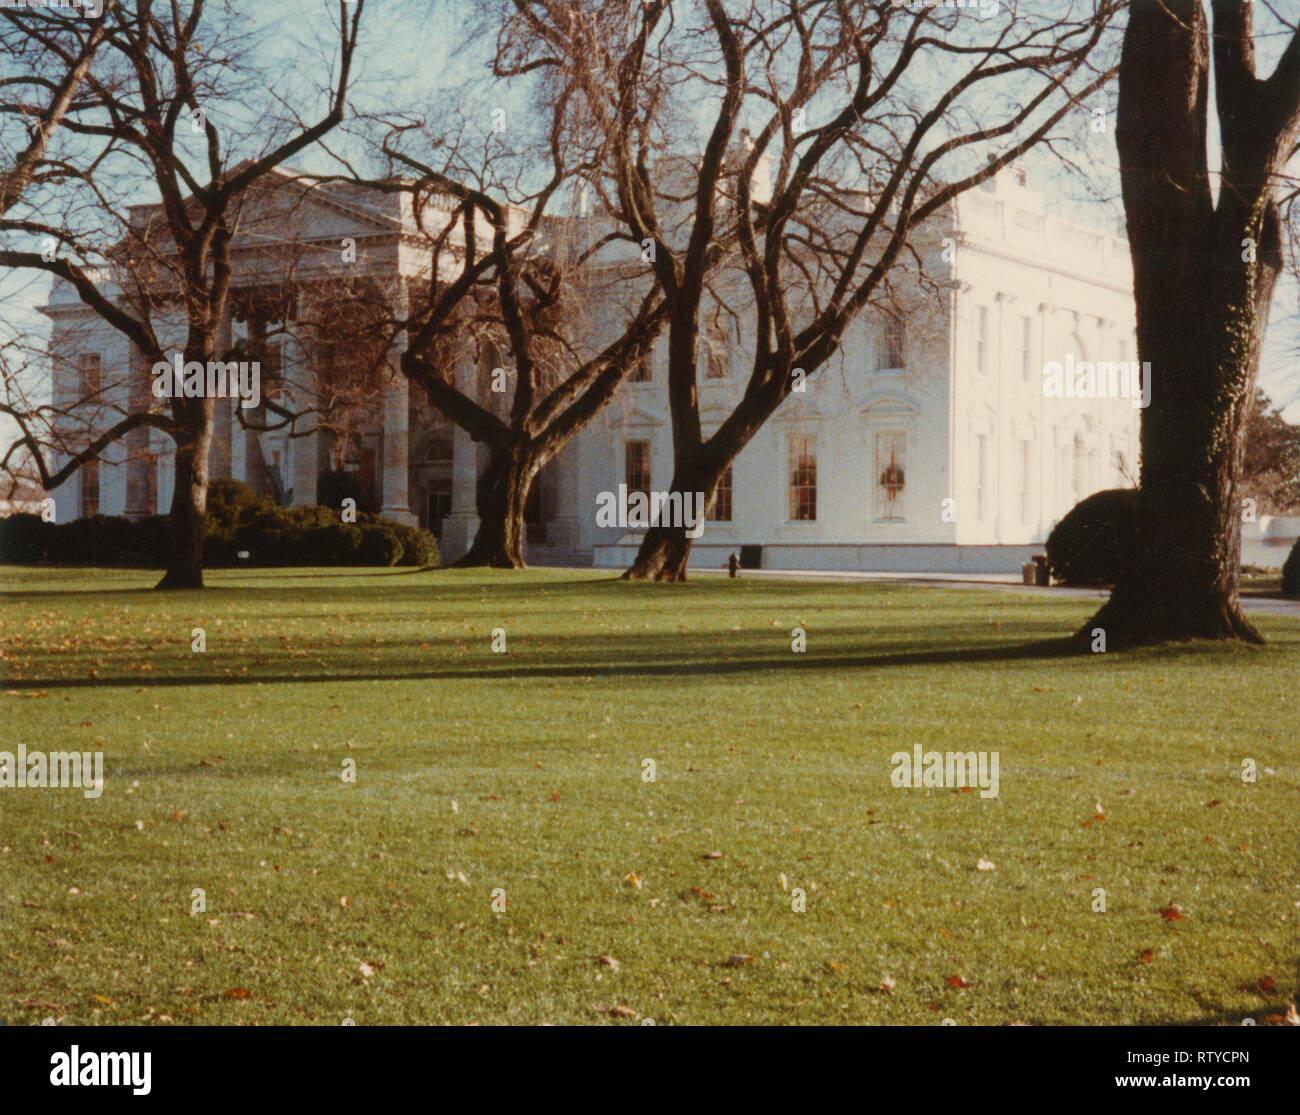 Vintage February 1985 photograph, view of the White House in Washington, DC, with a bucket truck removing the holiday garland. SOURCE: ORIGINAL PHOTOGRAPH Stock Photo